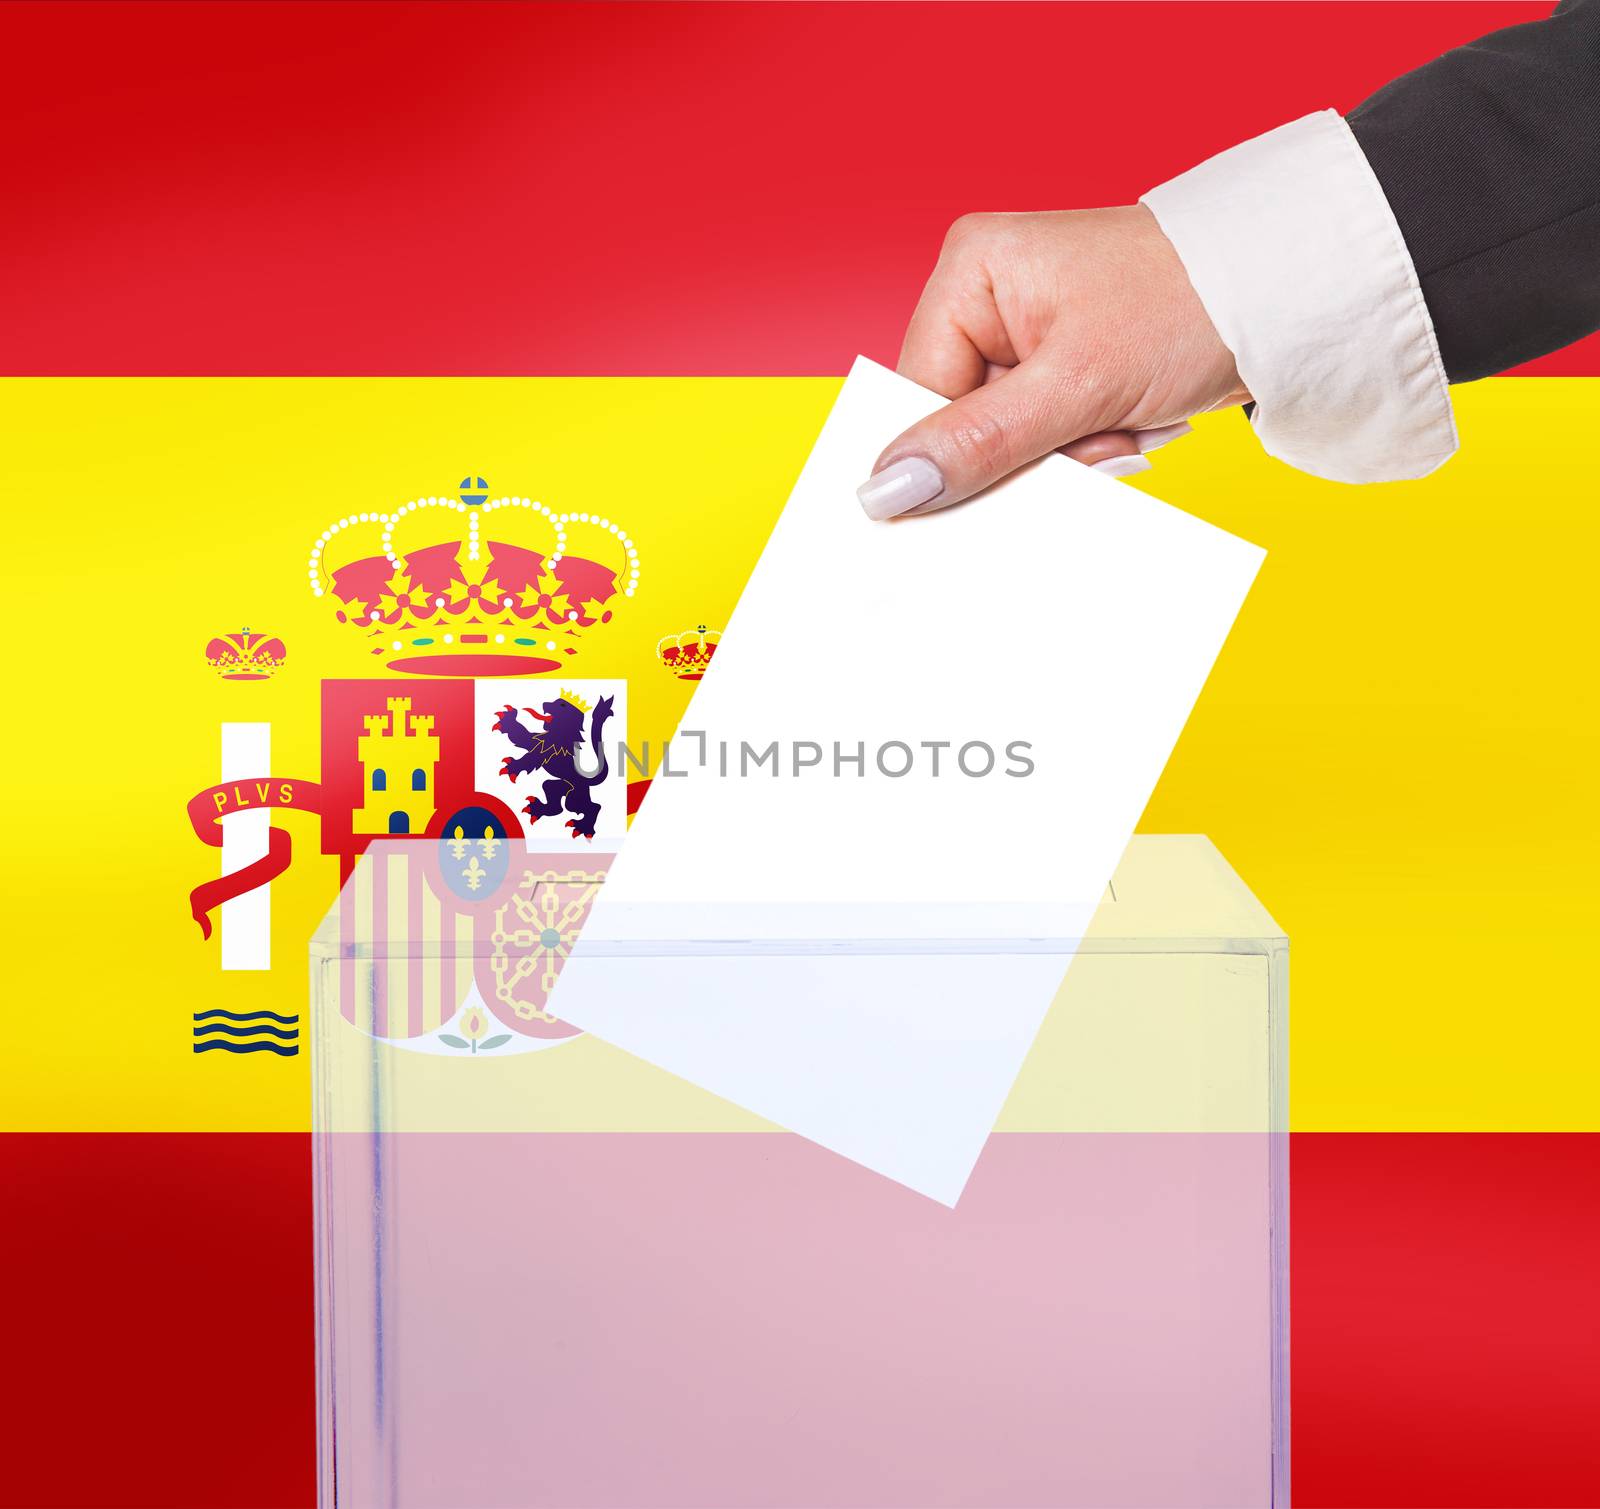 electoral vote by ballot, under the Spain flag